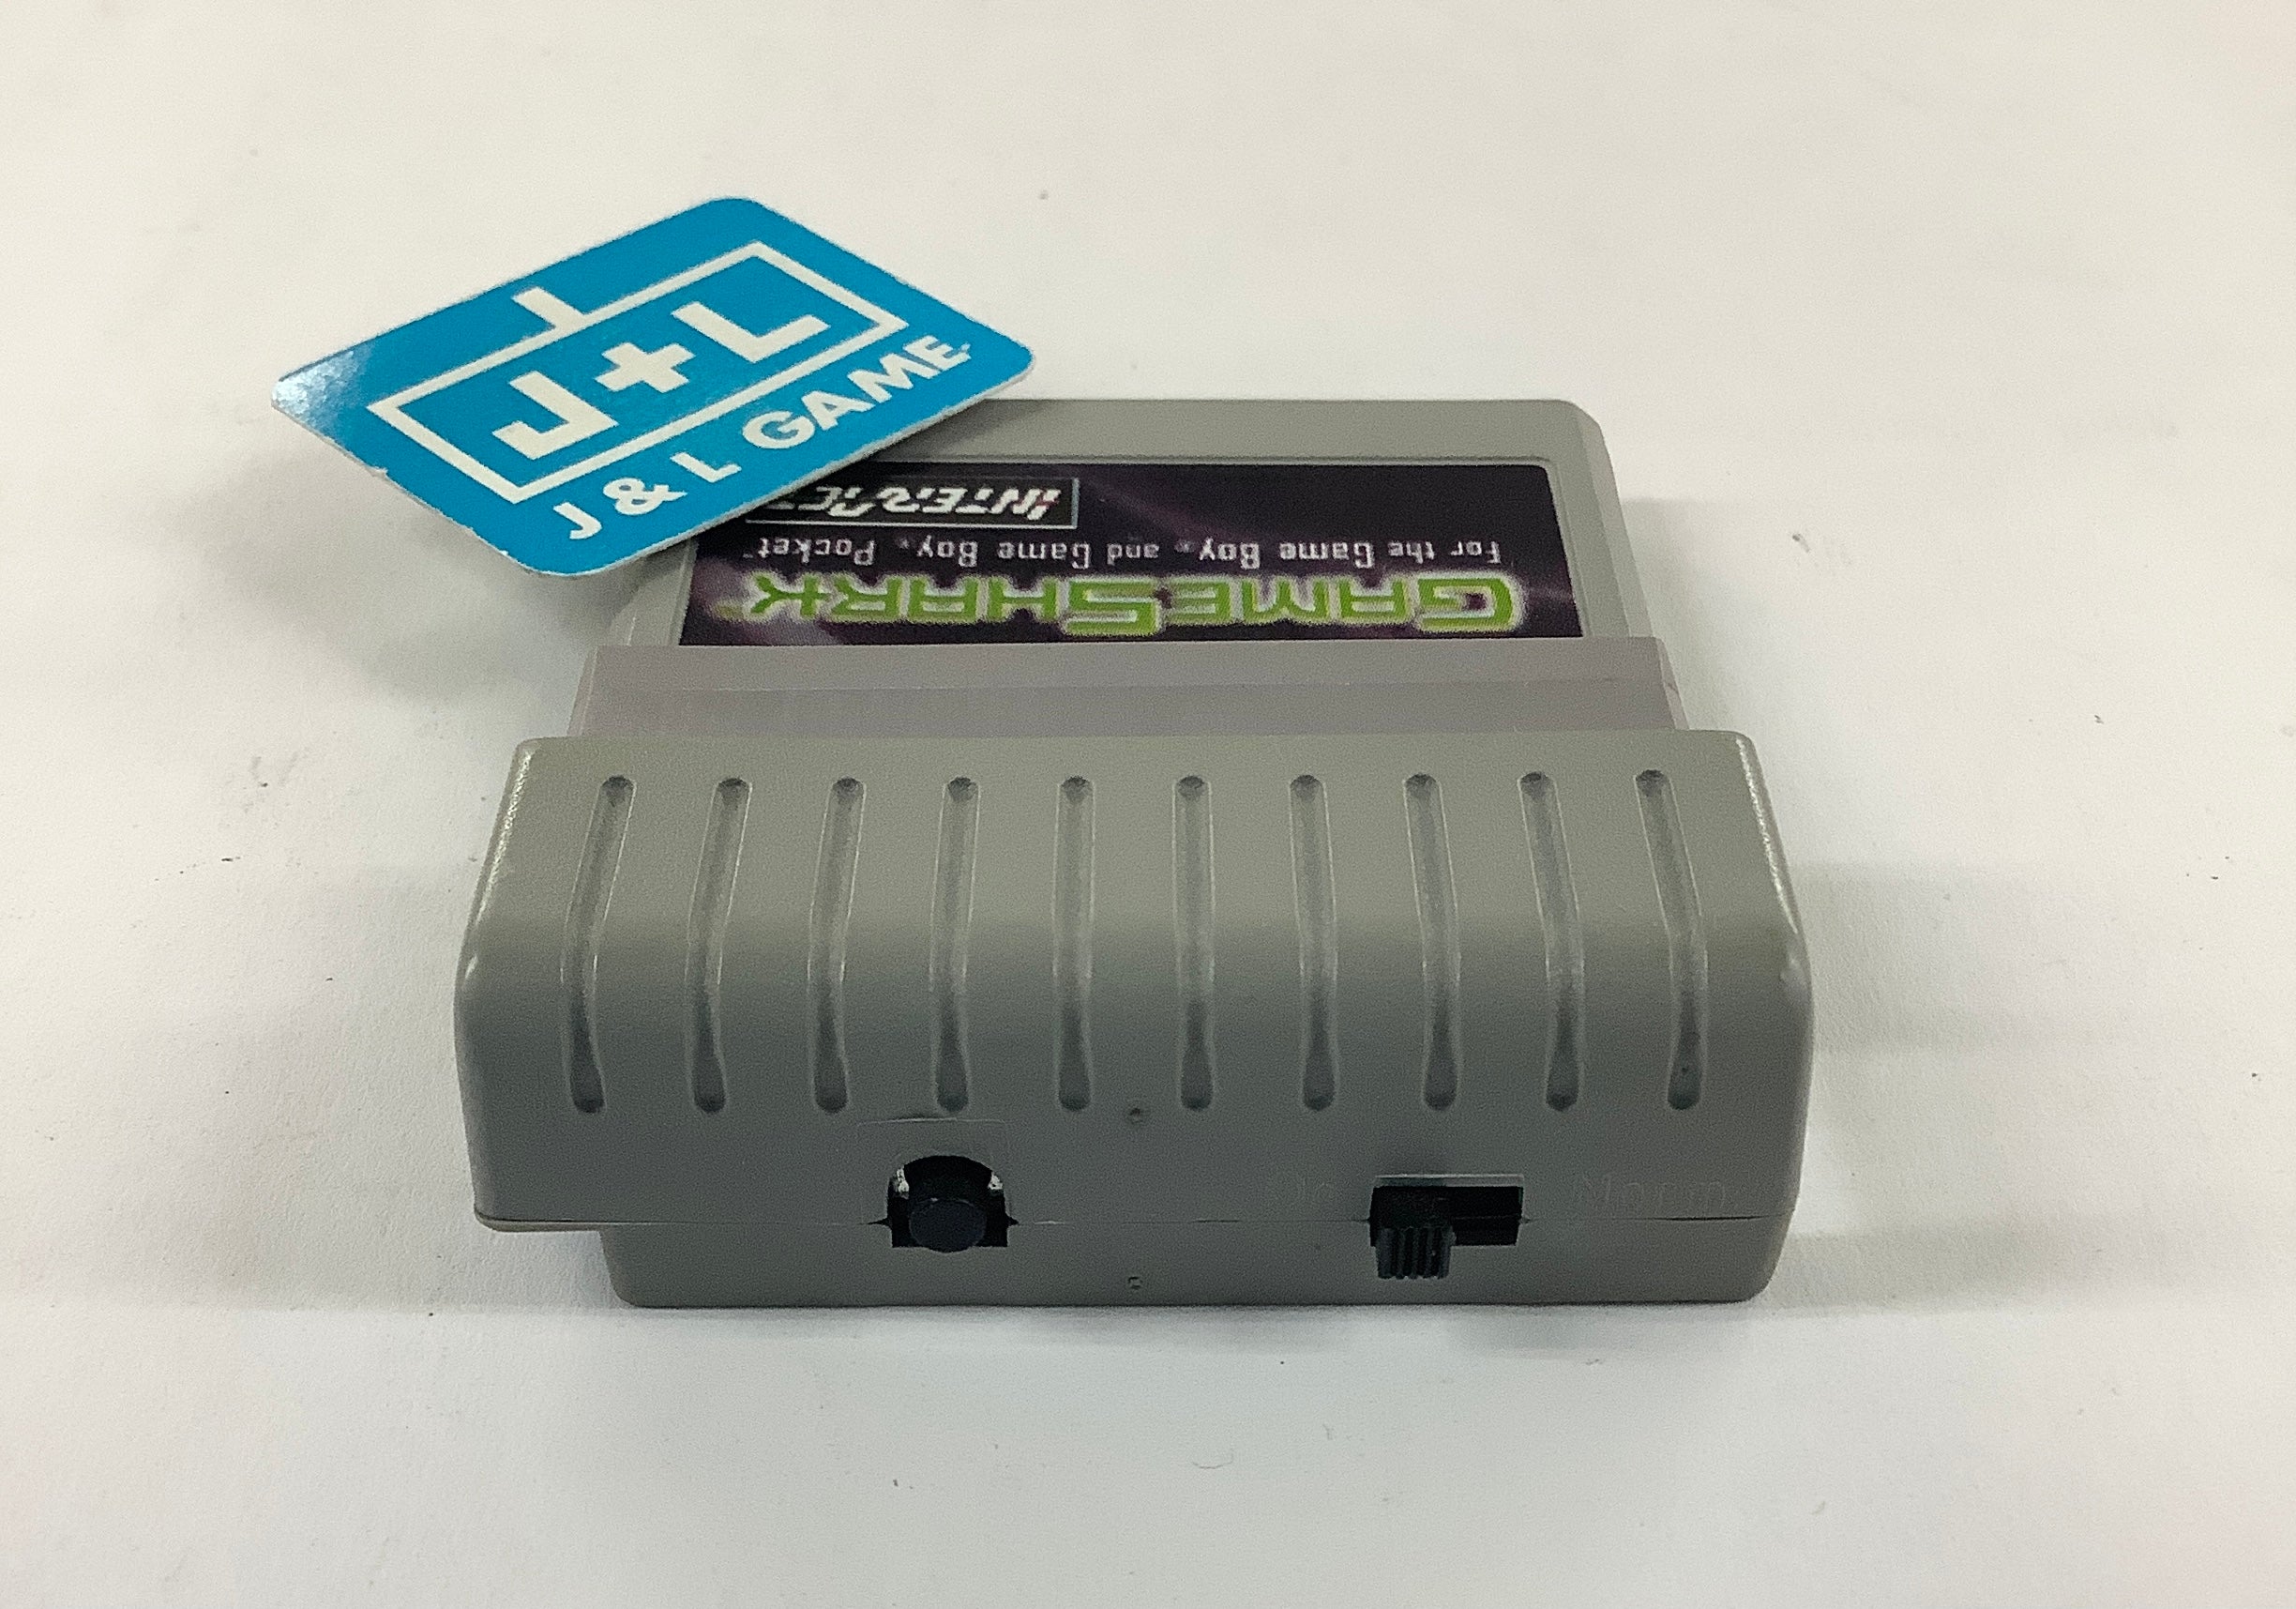 InterAct GameShark - (GB) Game Boy [Pre-Owned] Accessories InterAct   